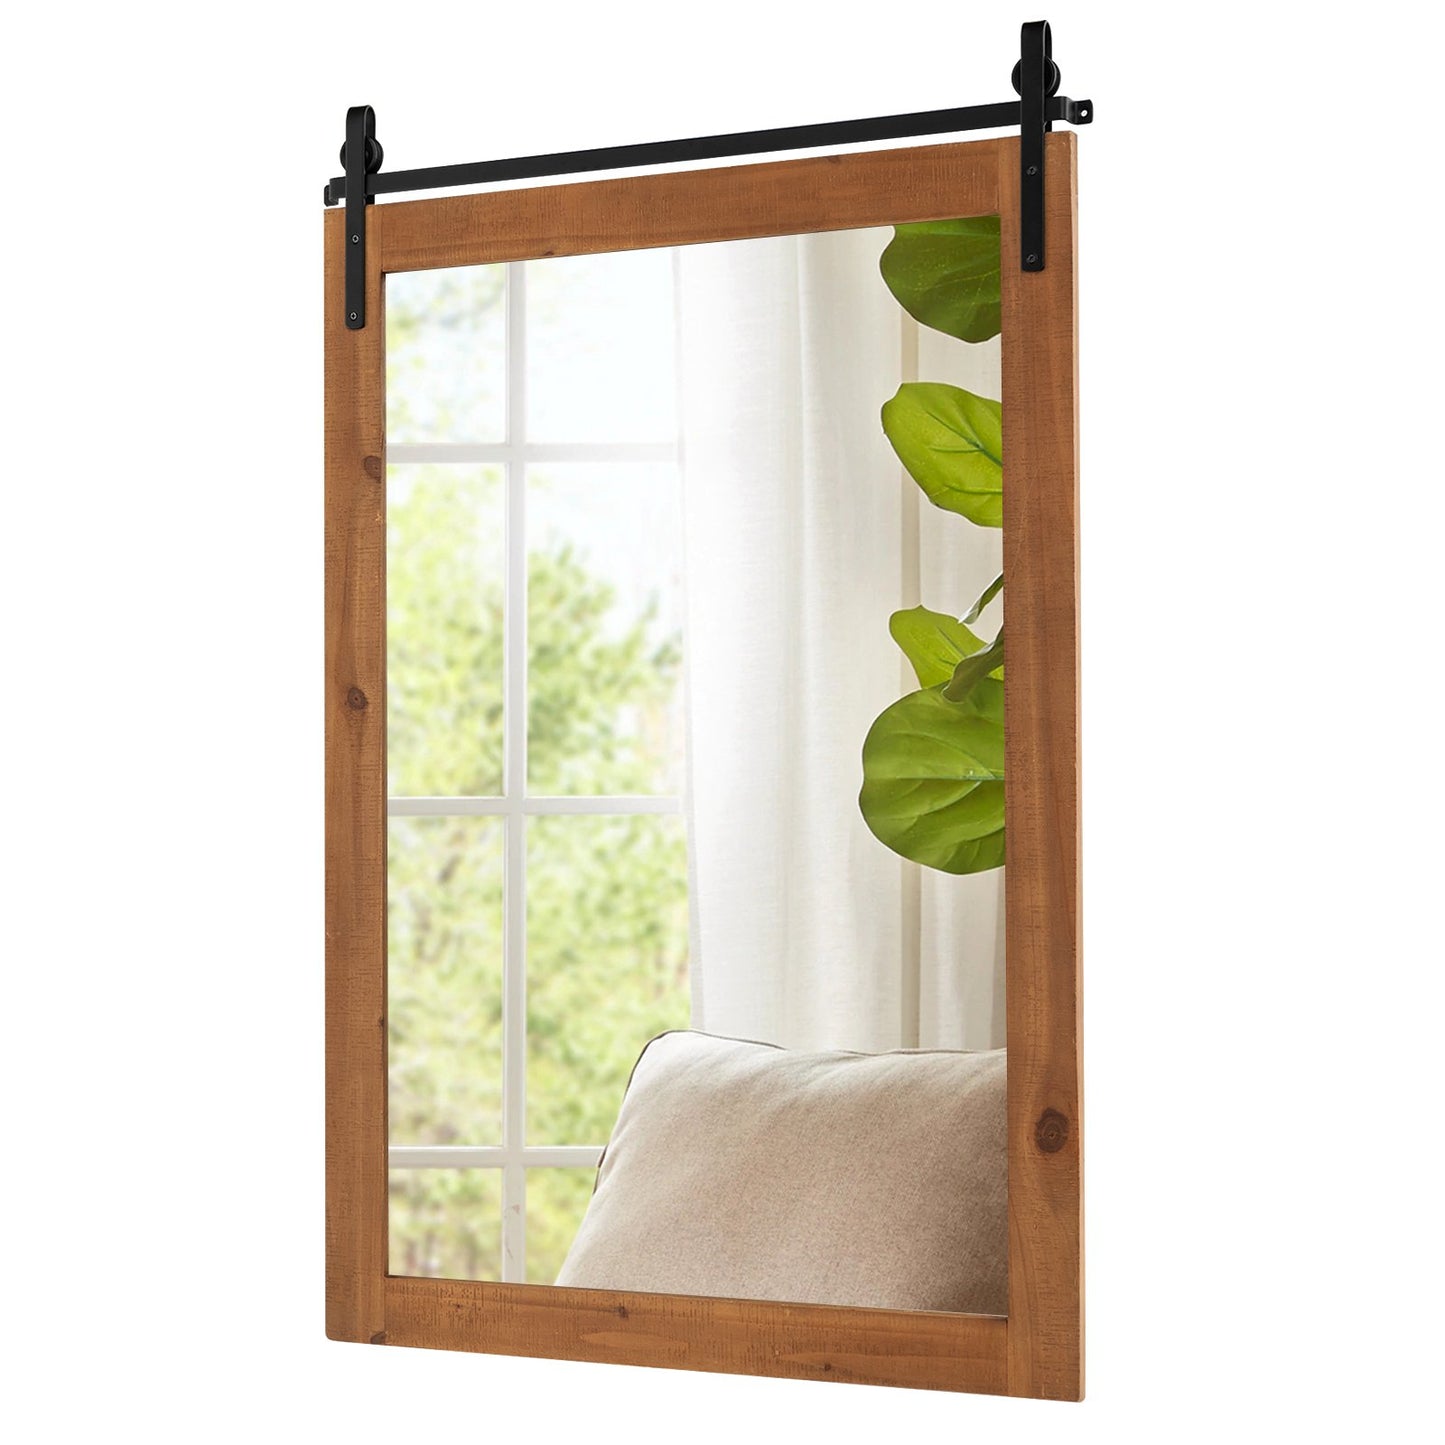 40 x 25 Inch Farmhouse Bathroom Mirror with Wooden Frame and Metal Bracket, Brown